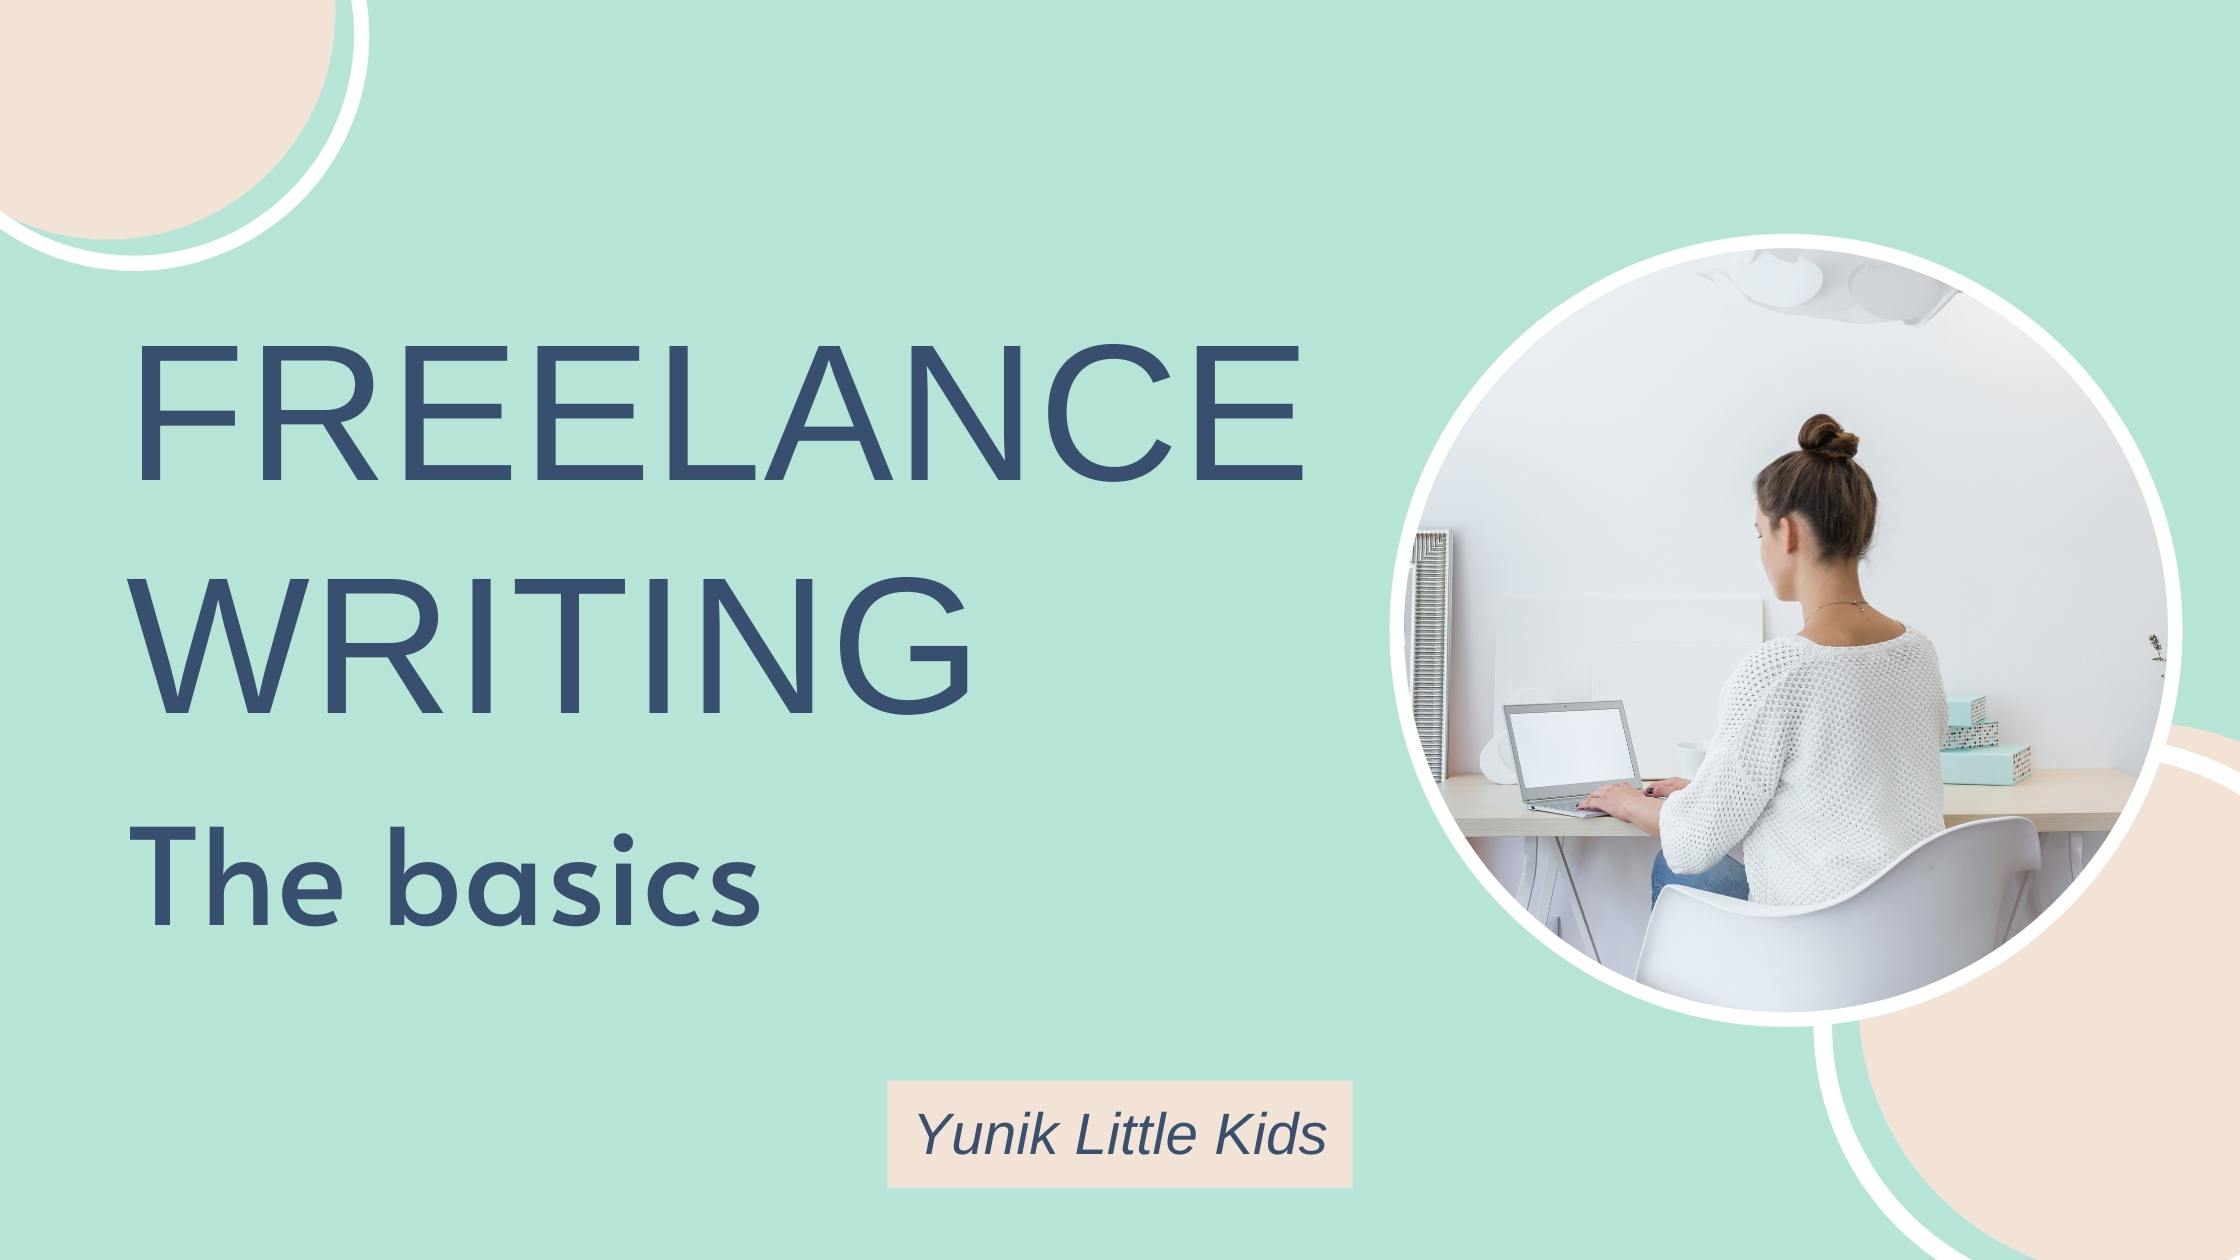 What is freelance writing